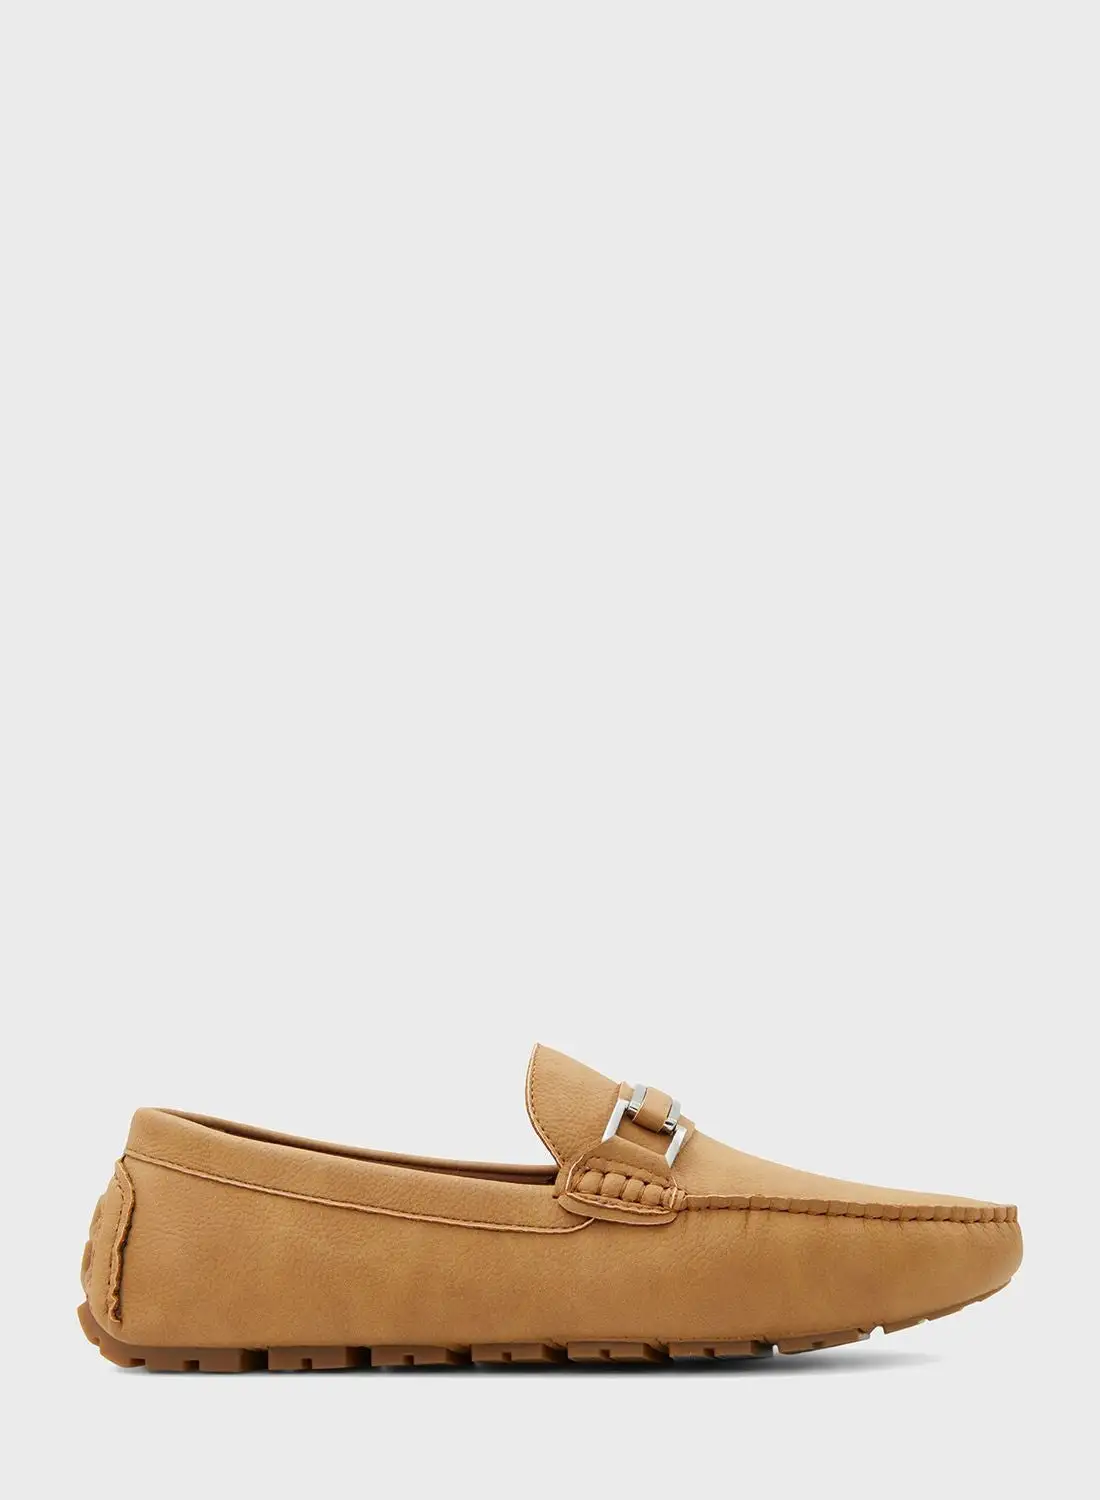 CALL IT SPRING Formal Slip On Loafers